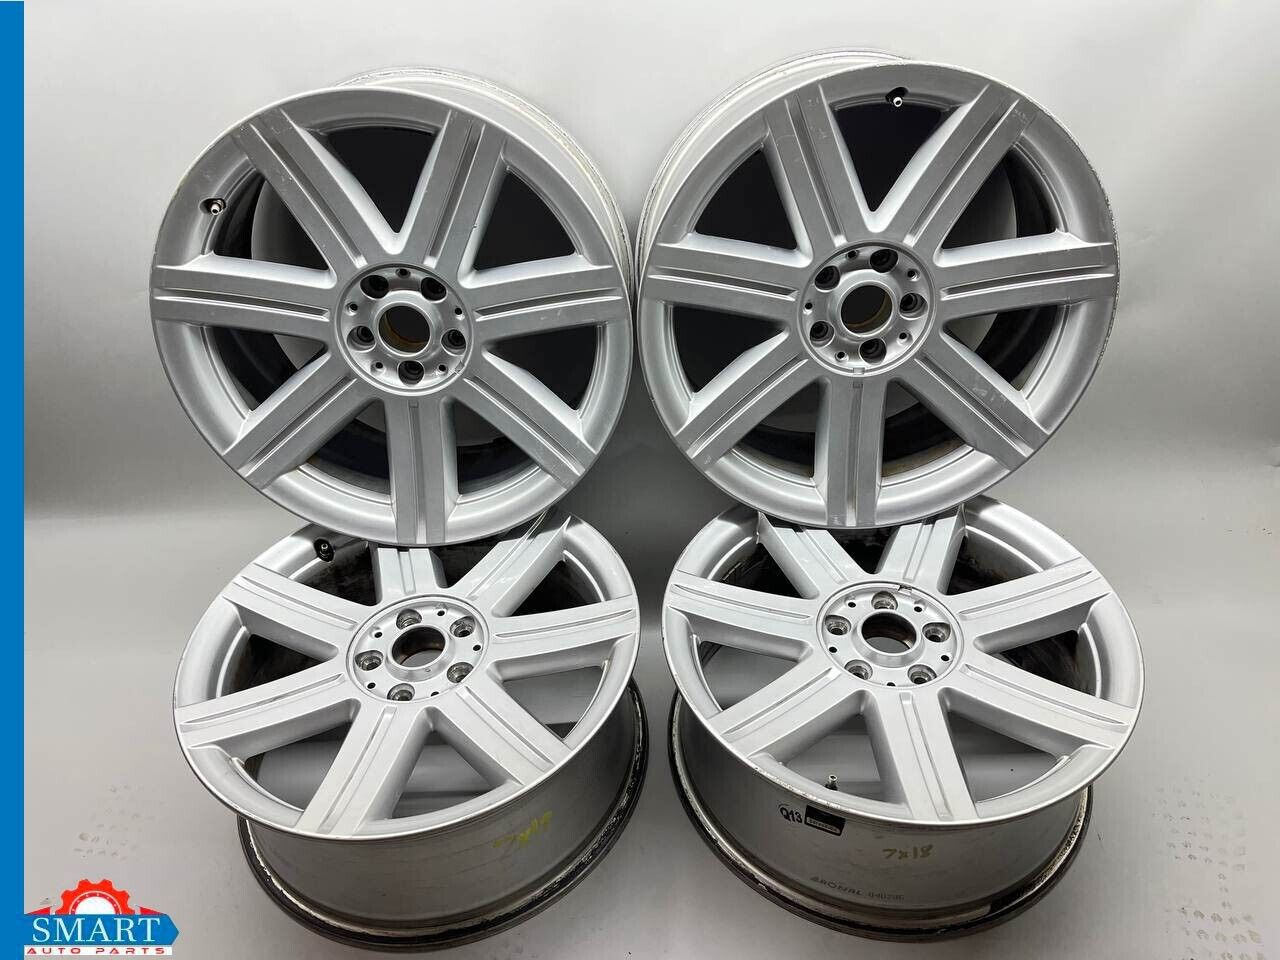 Chrysler Crossfire Rim Wheel Set Of 4 04-08 OEM Have Some Scratches